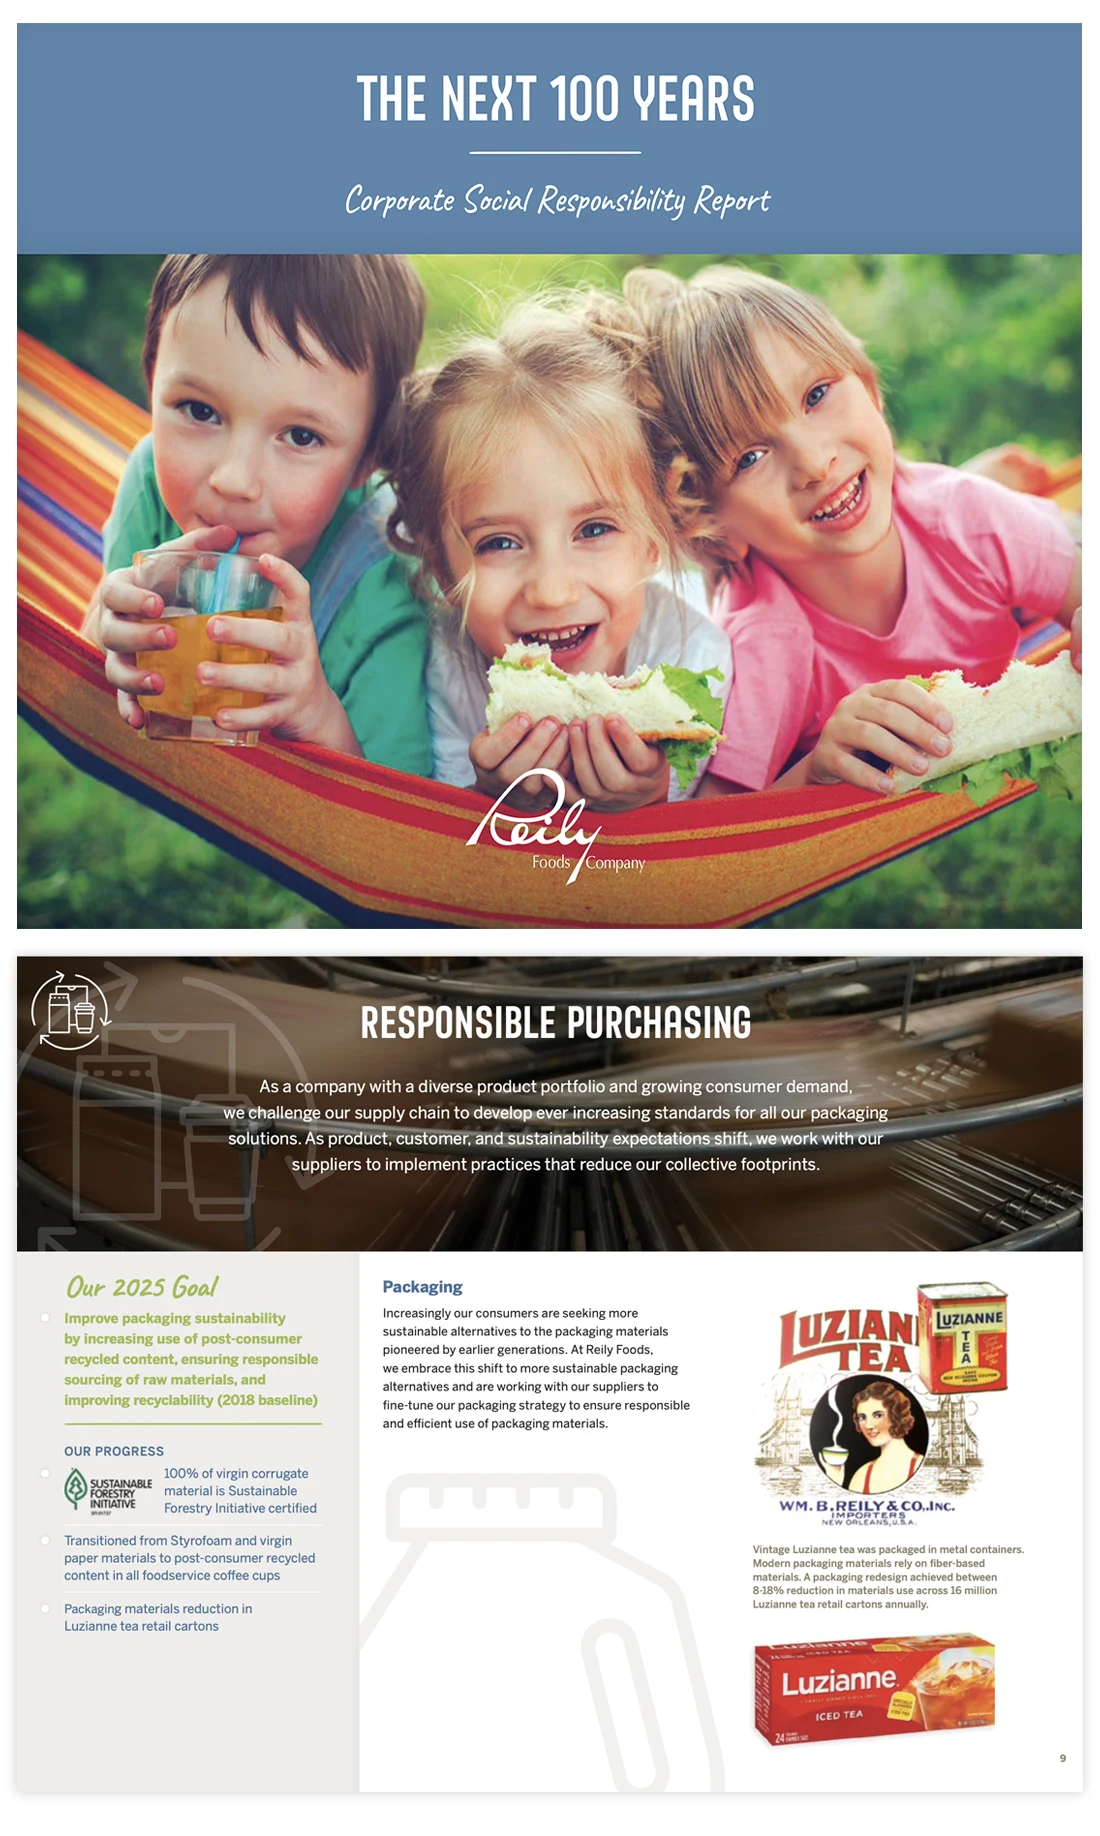 Reily Foods Corporate Social Responsibility Report